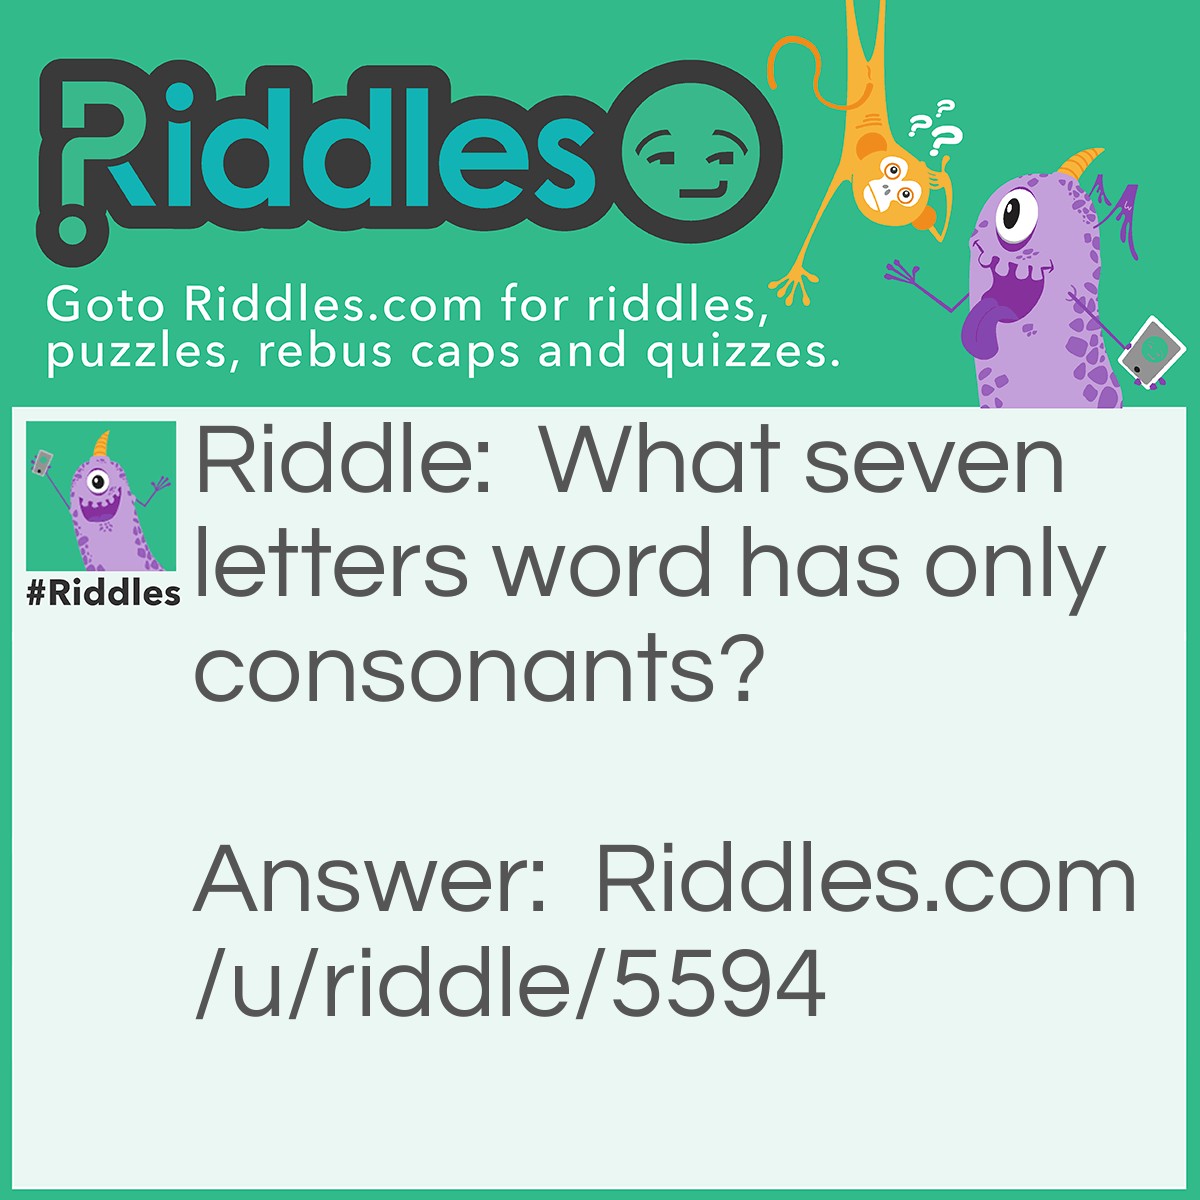 Riddle: What seven letters word has only consonants? Answer: Tsktsks.